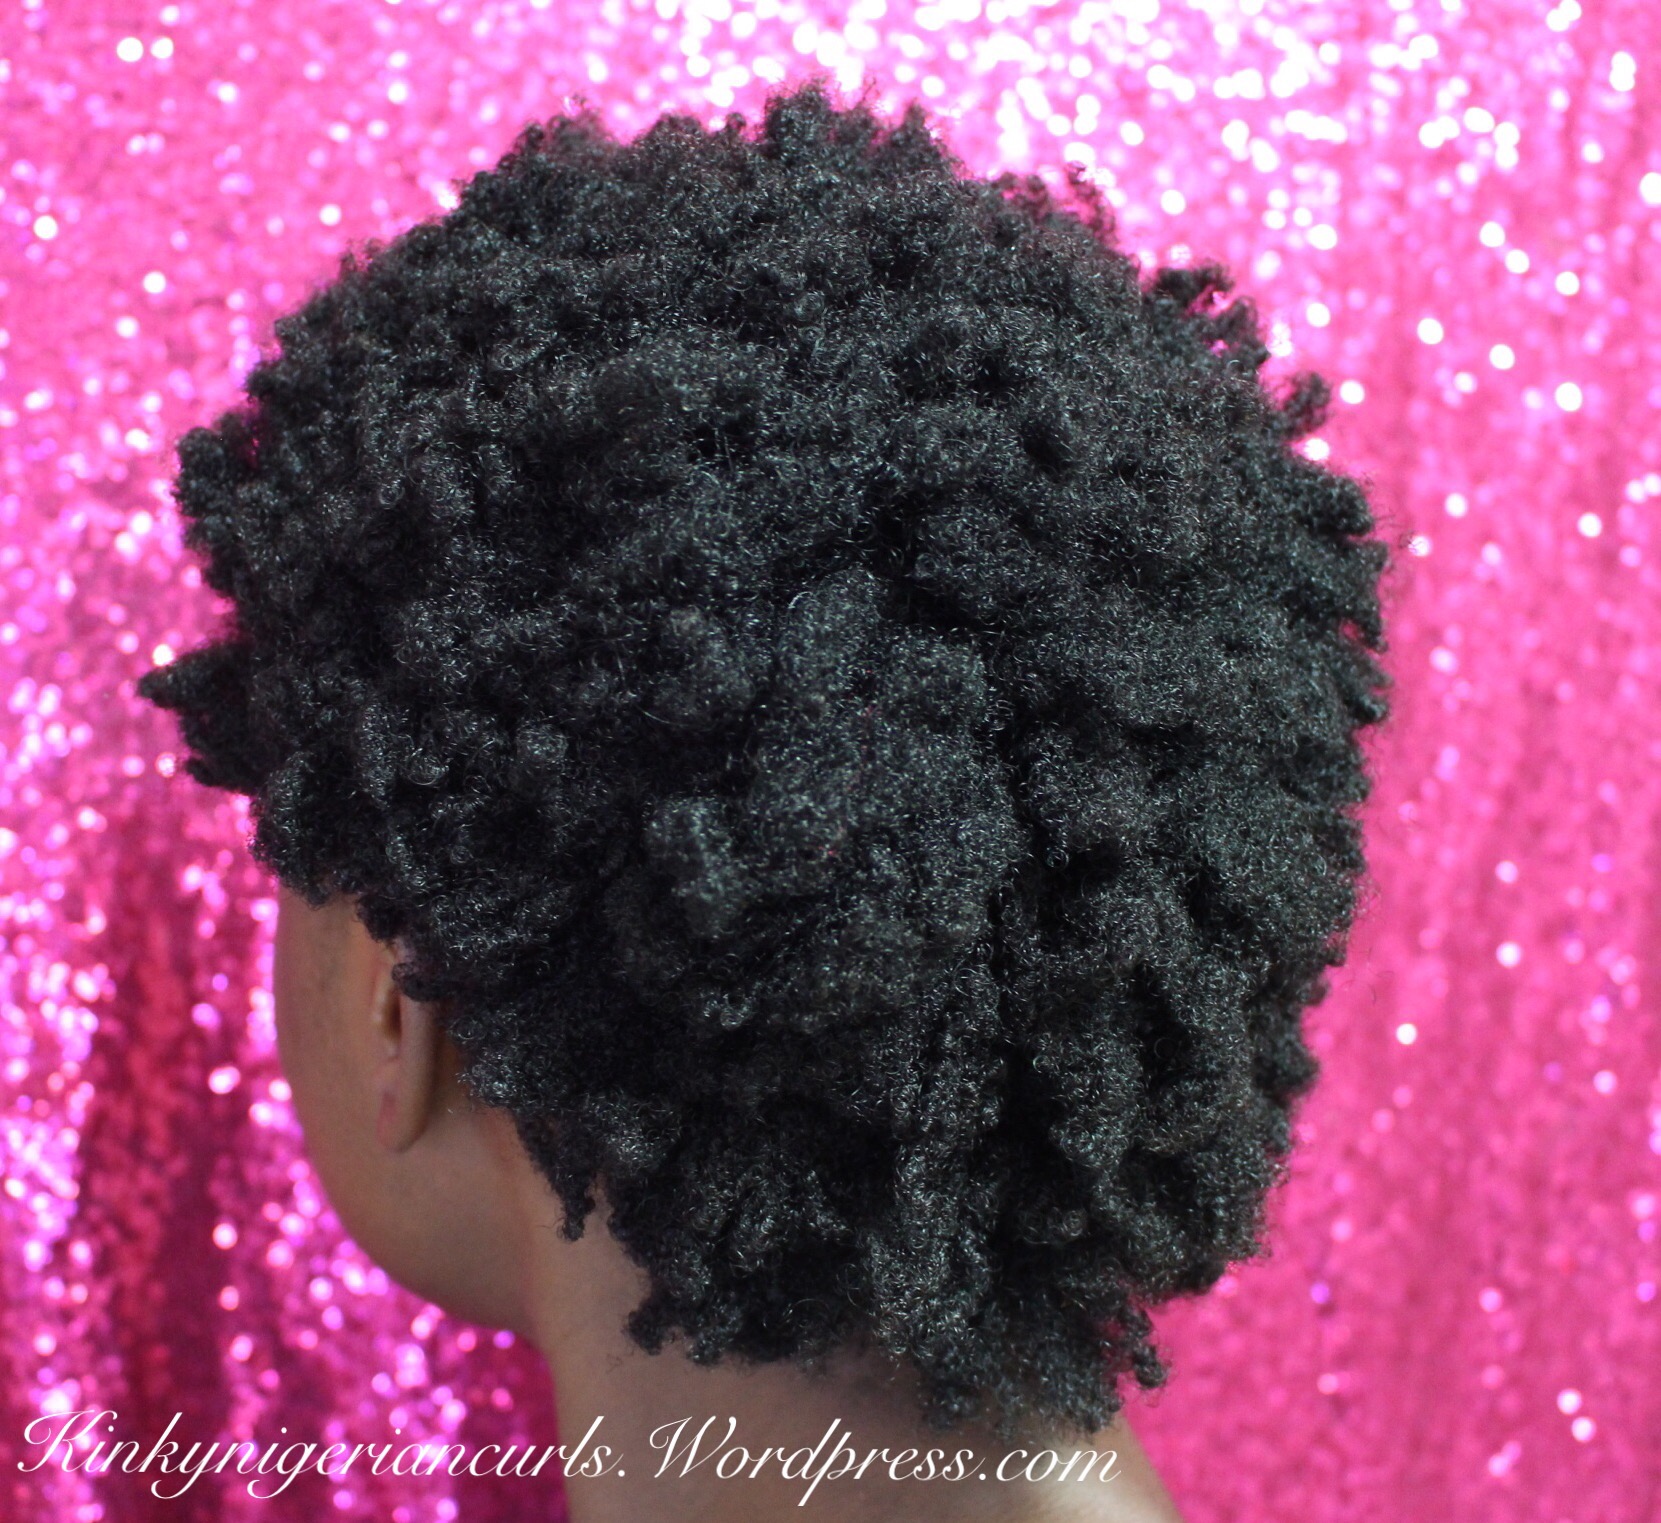 Defined Braid Out On 4C Natural Hair Featuring Lotta Body Foaming